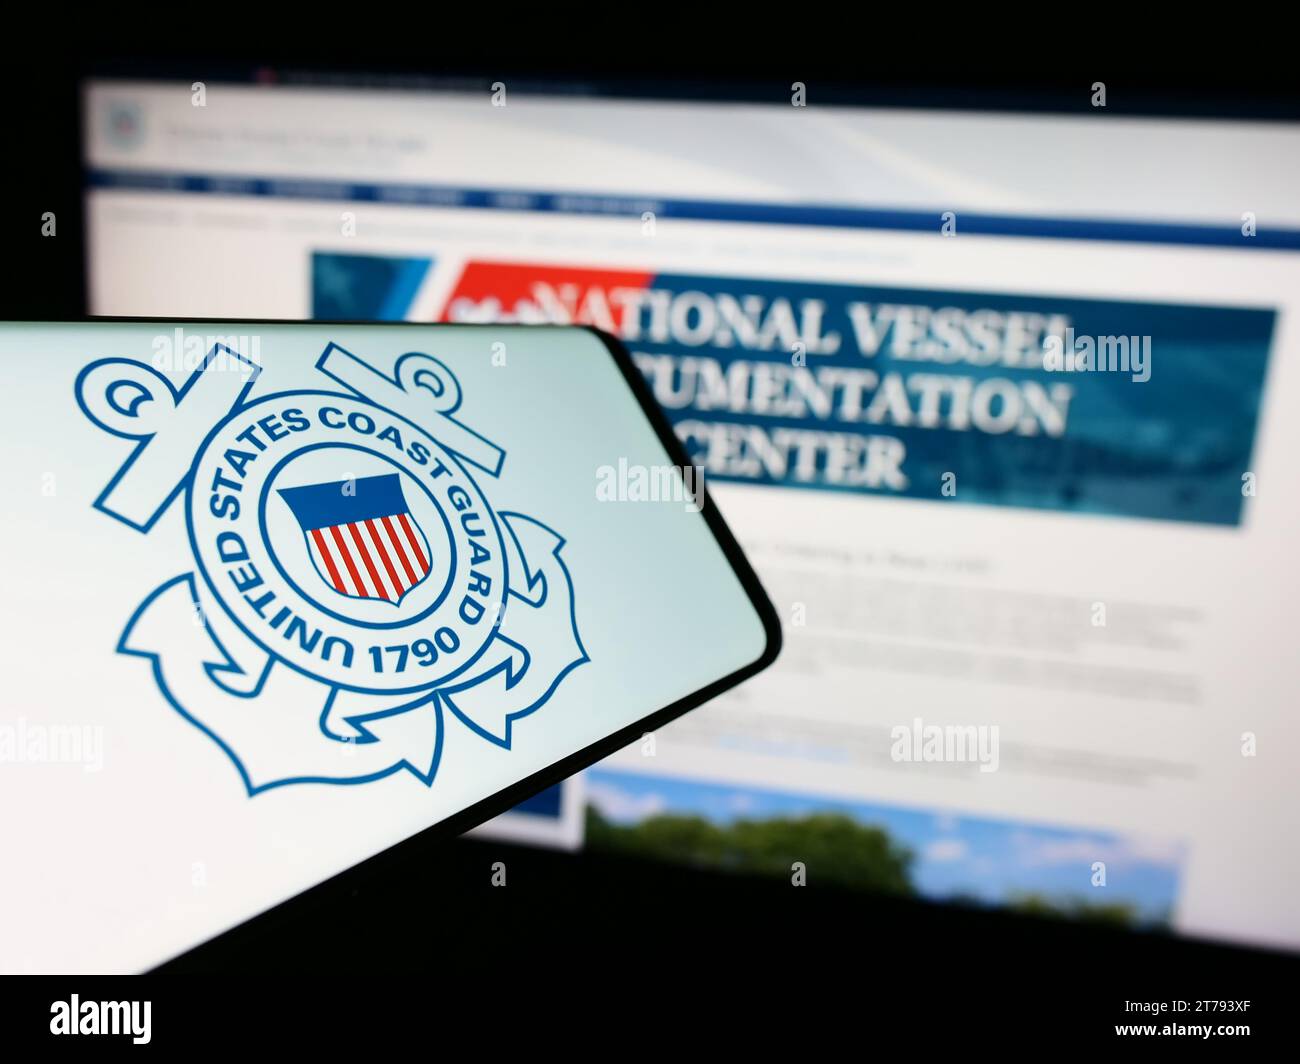 Smartphone with seal of United States Coast Guard (USCG) in front of website. Focus on center of phone display. Stock Photo